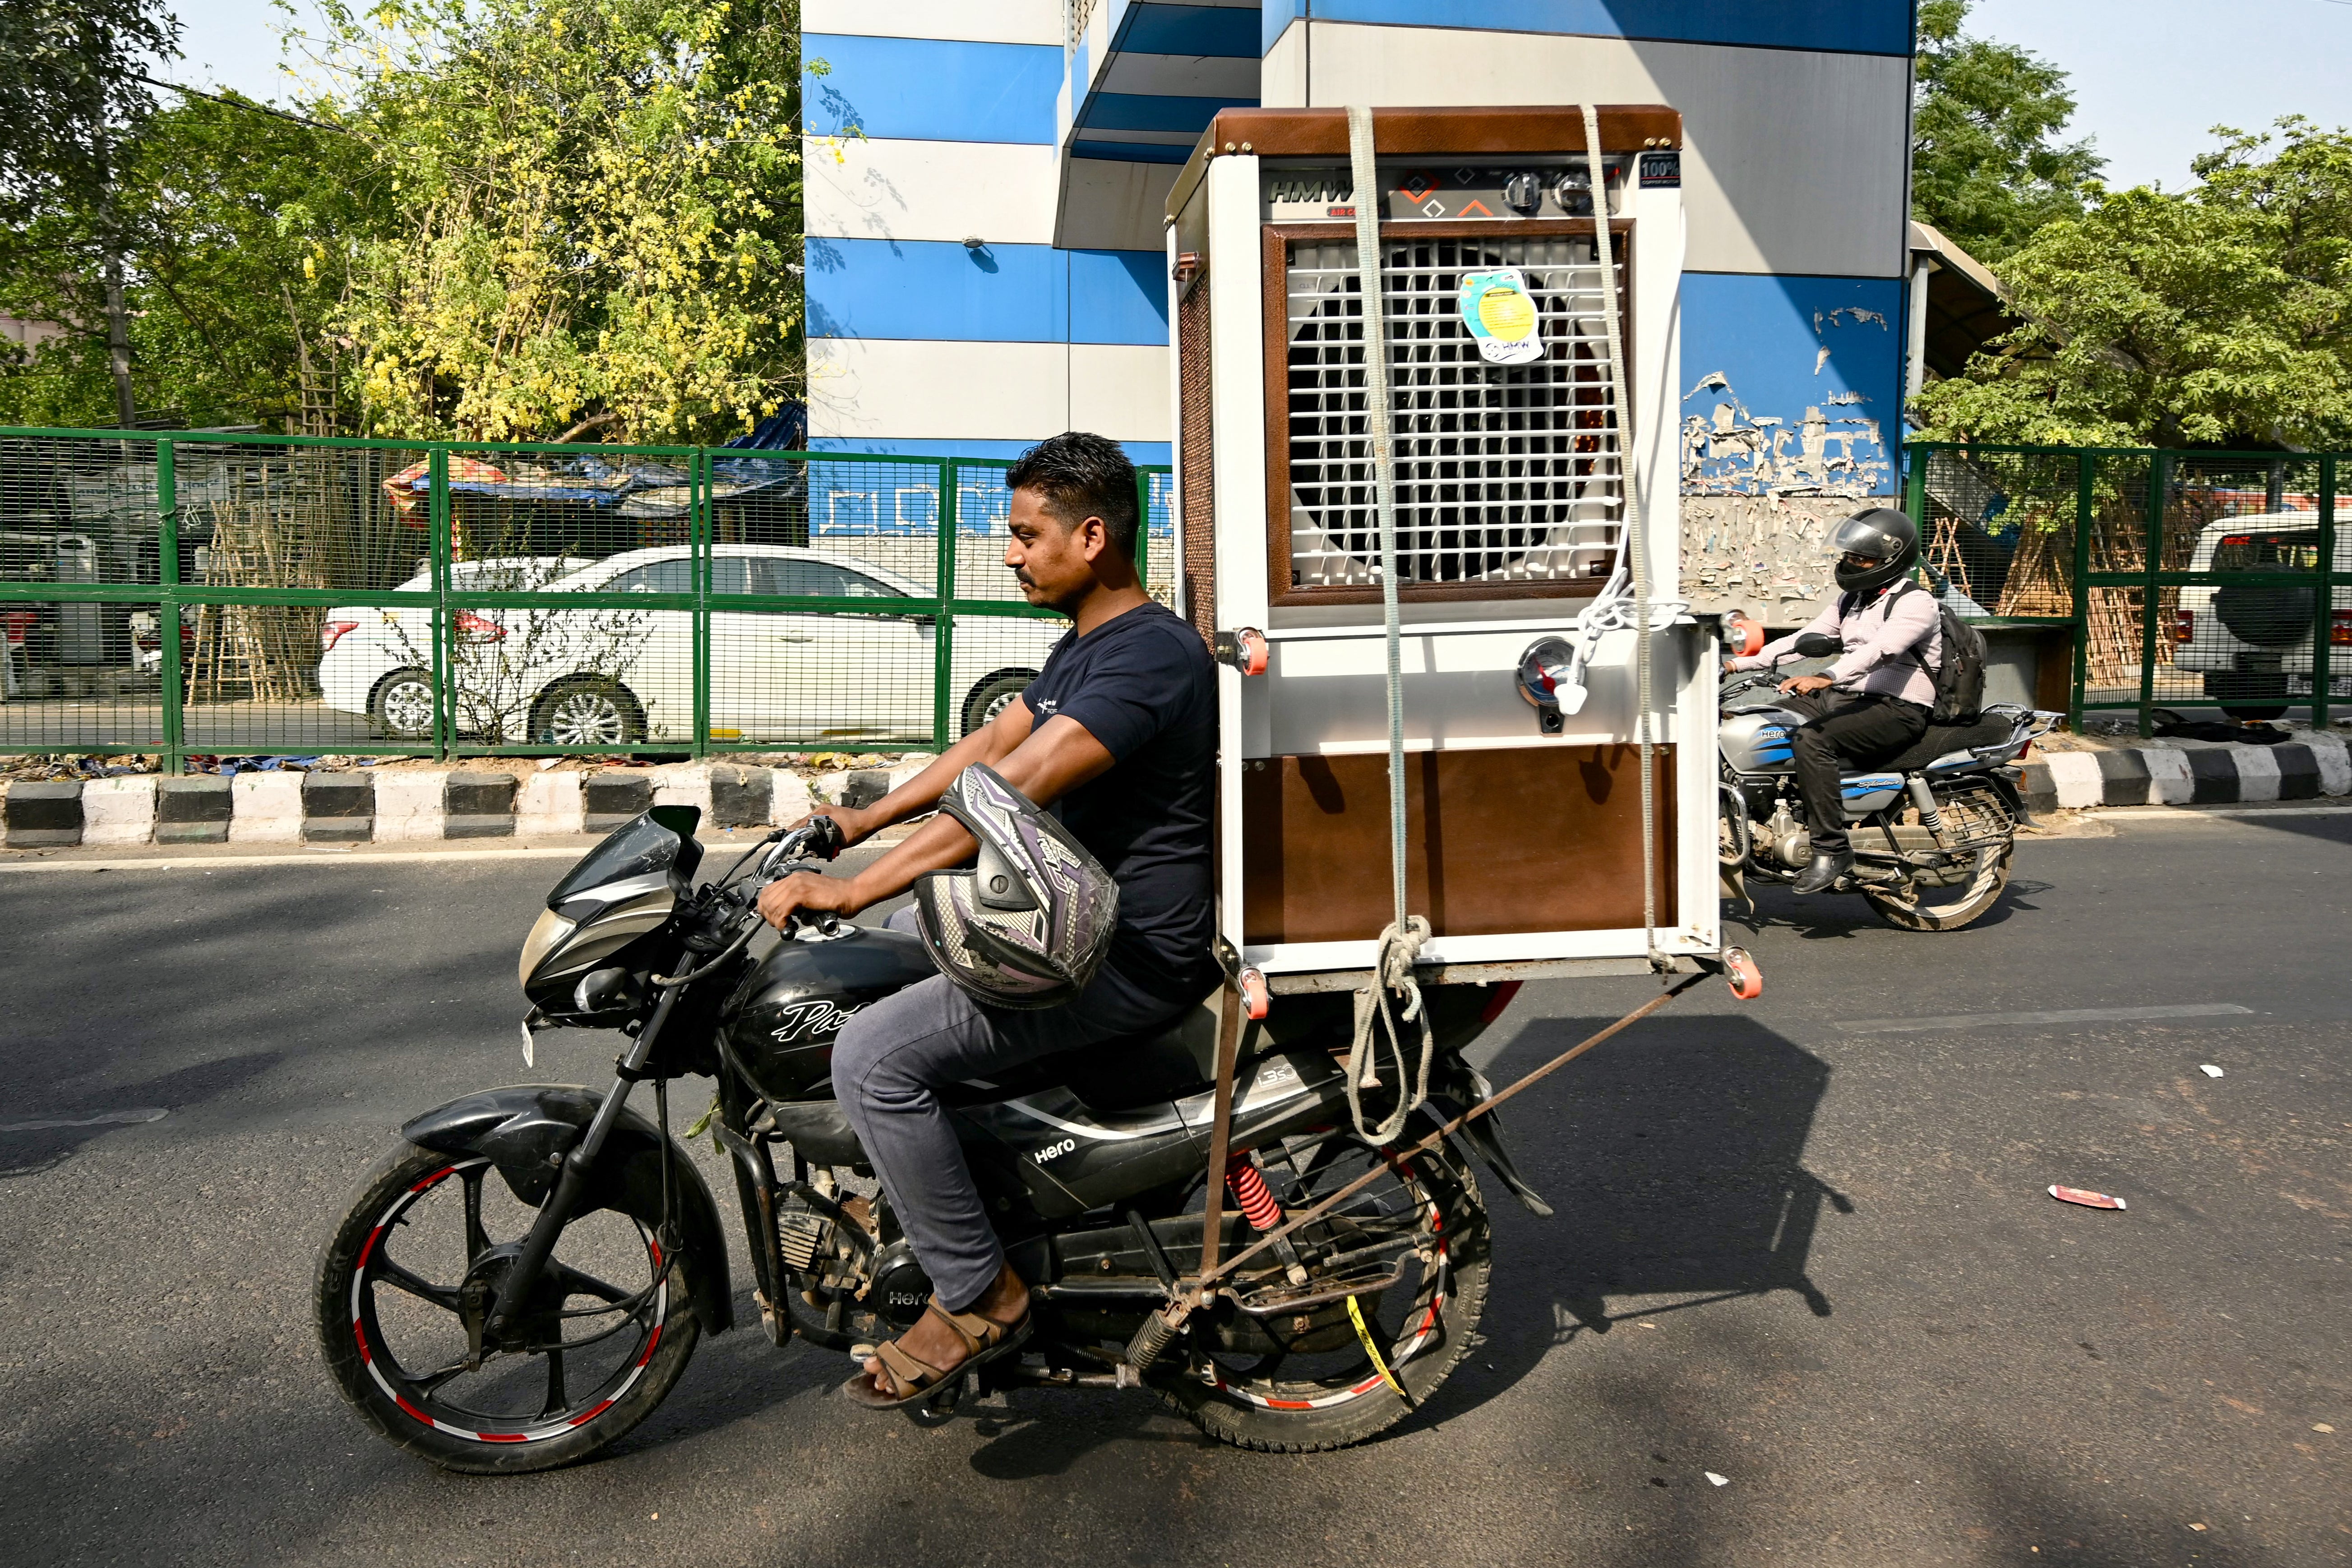 A man carrying a newly purchased air cooler rides a bike along a street, on a hot summer afternoon in Delhi